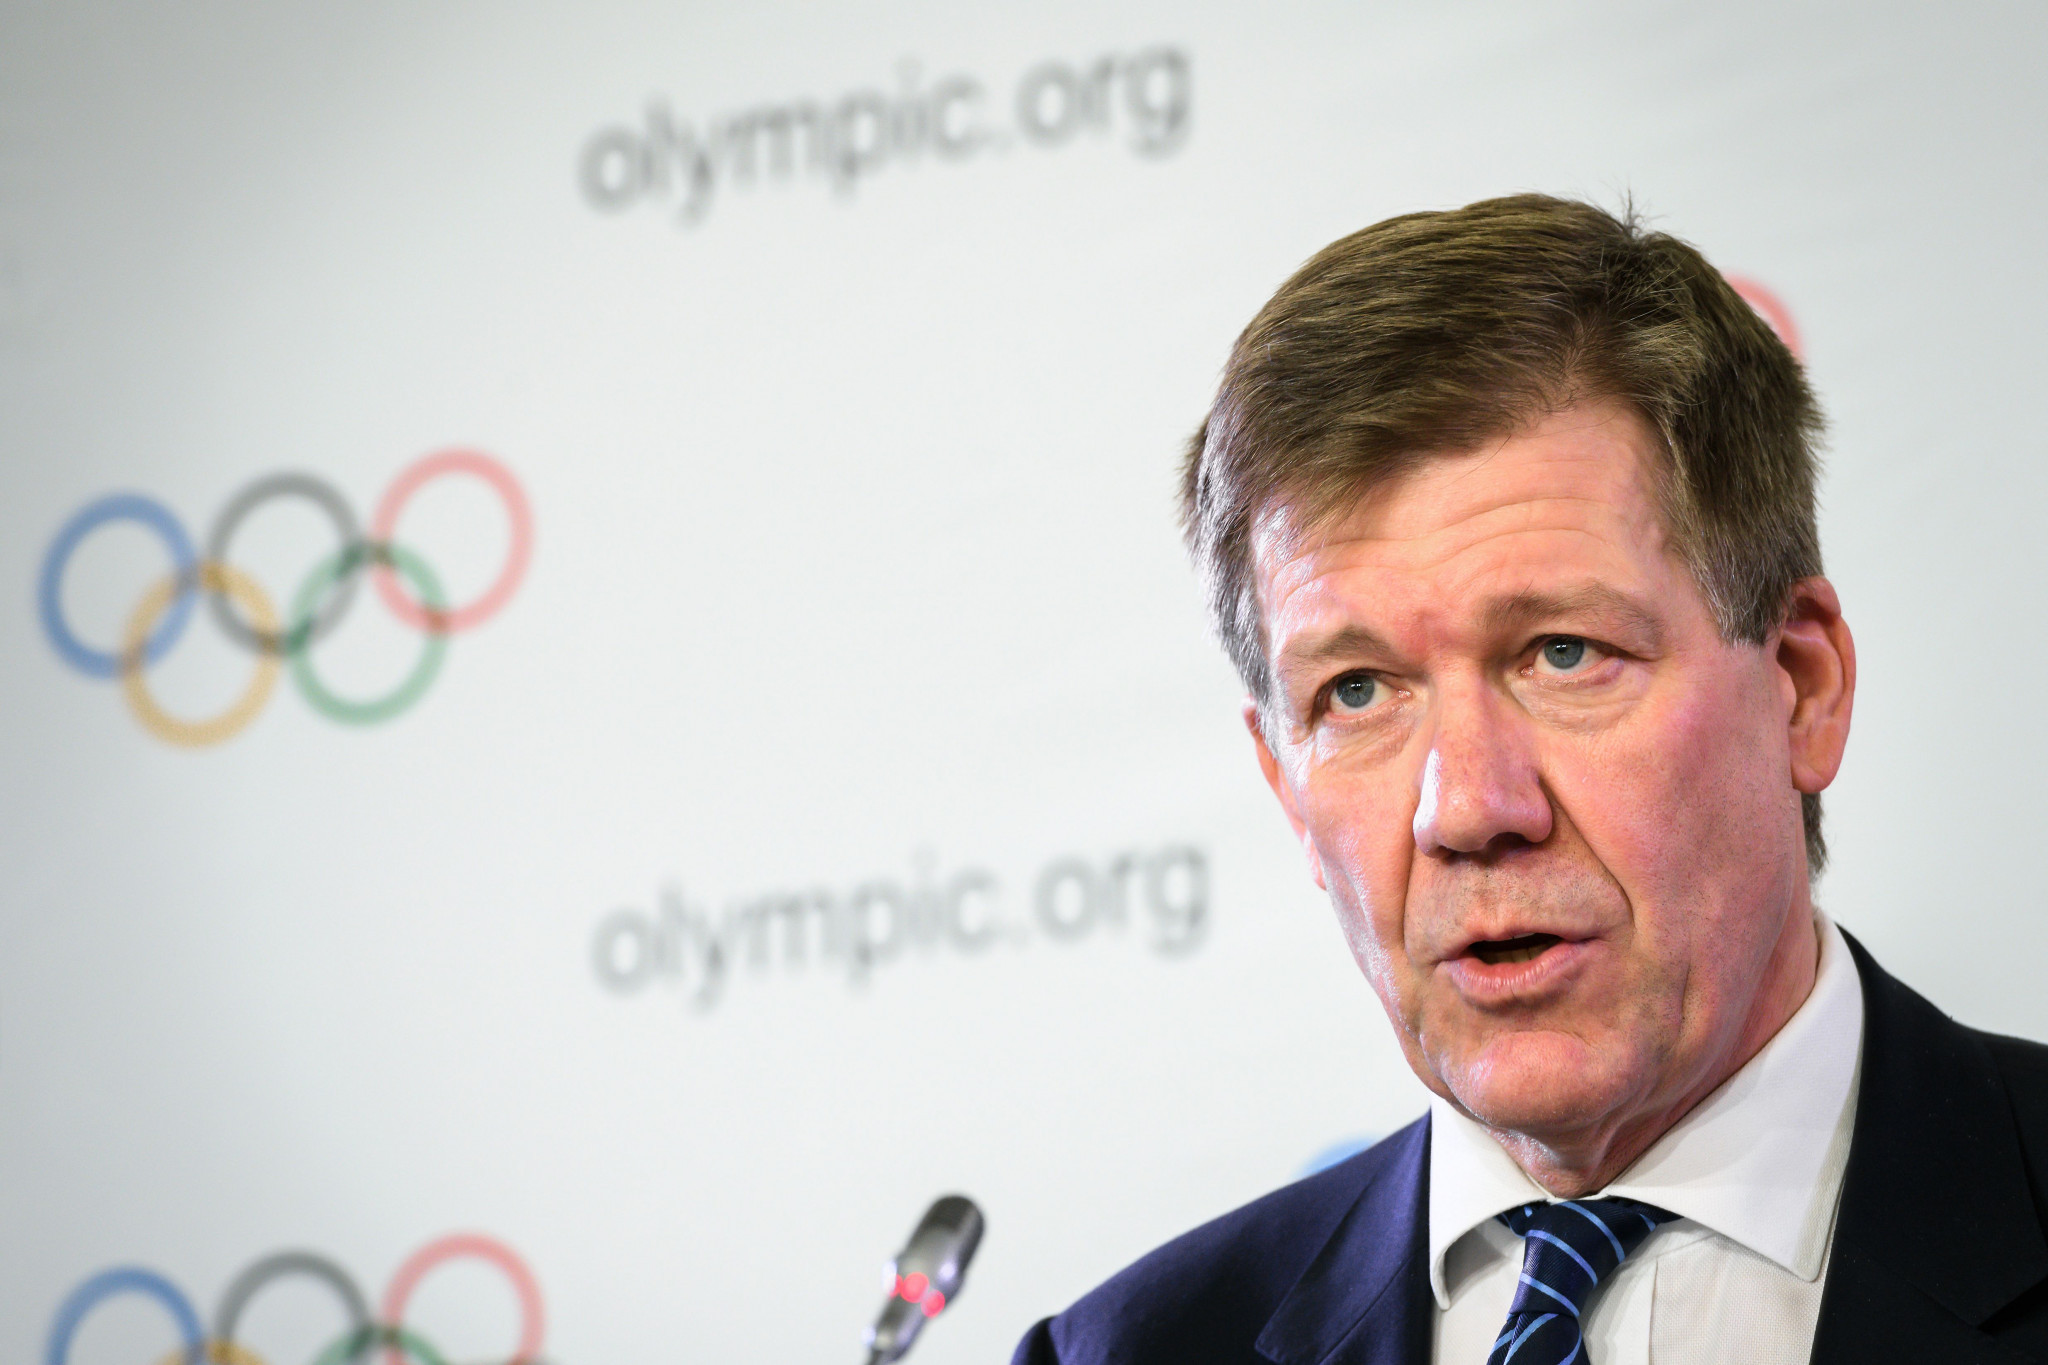 IOC medical and scientific director urges athletes to follow WHO advice on coronavirus